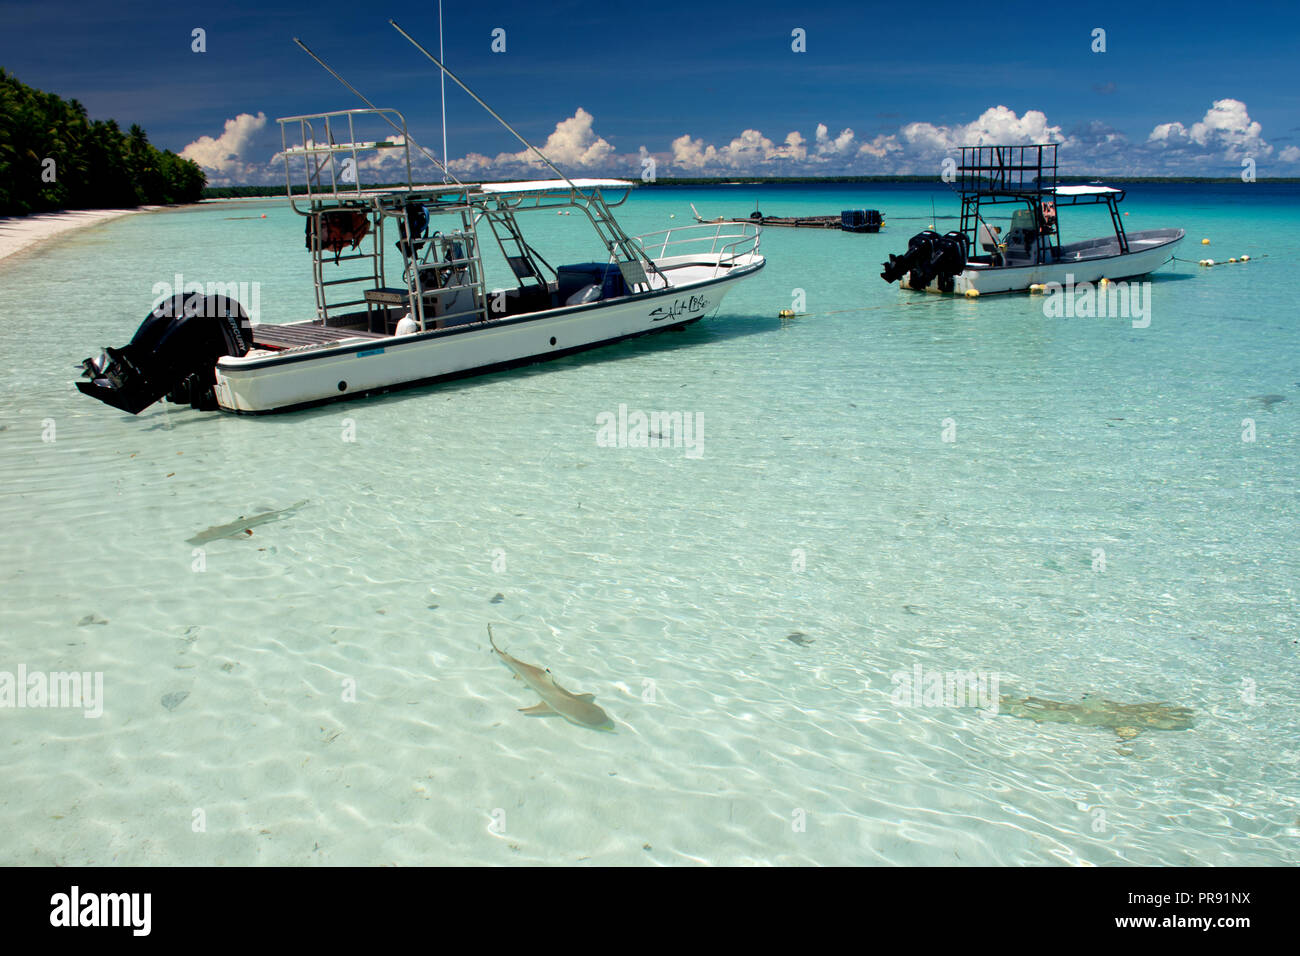 Three blacktip reef sharks, Carcharhinus melanopterus,  swim in the shallows close to moored boats, Ant Atoll, Pohnpei, Federated States of Micronesia Stock Photo